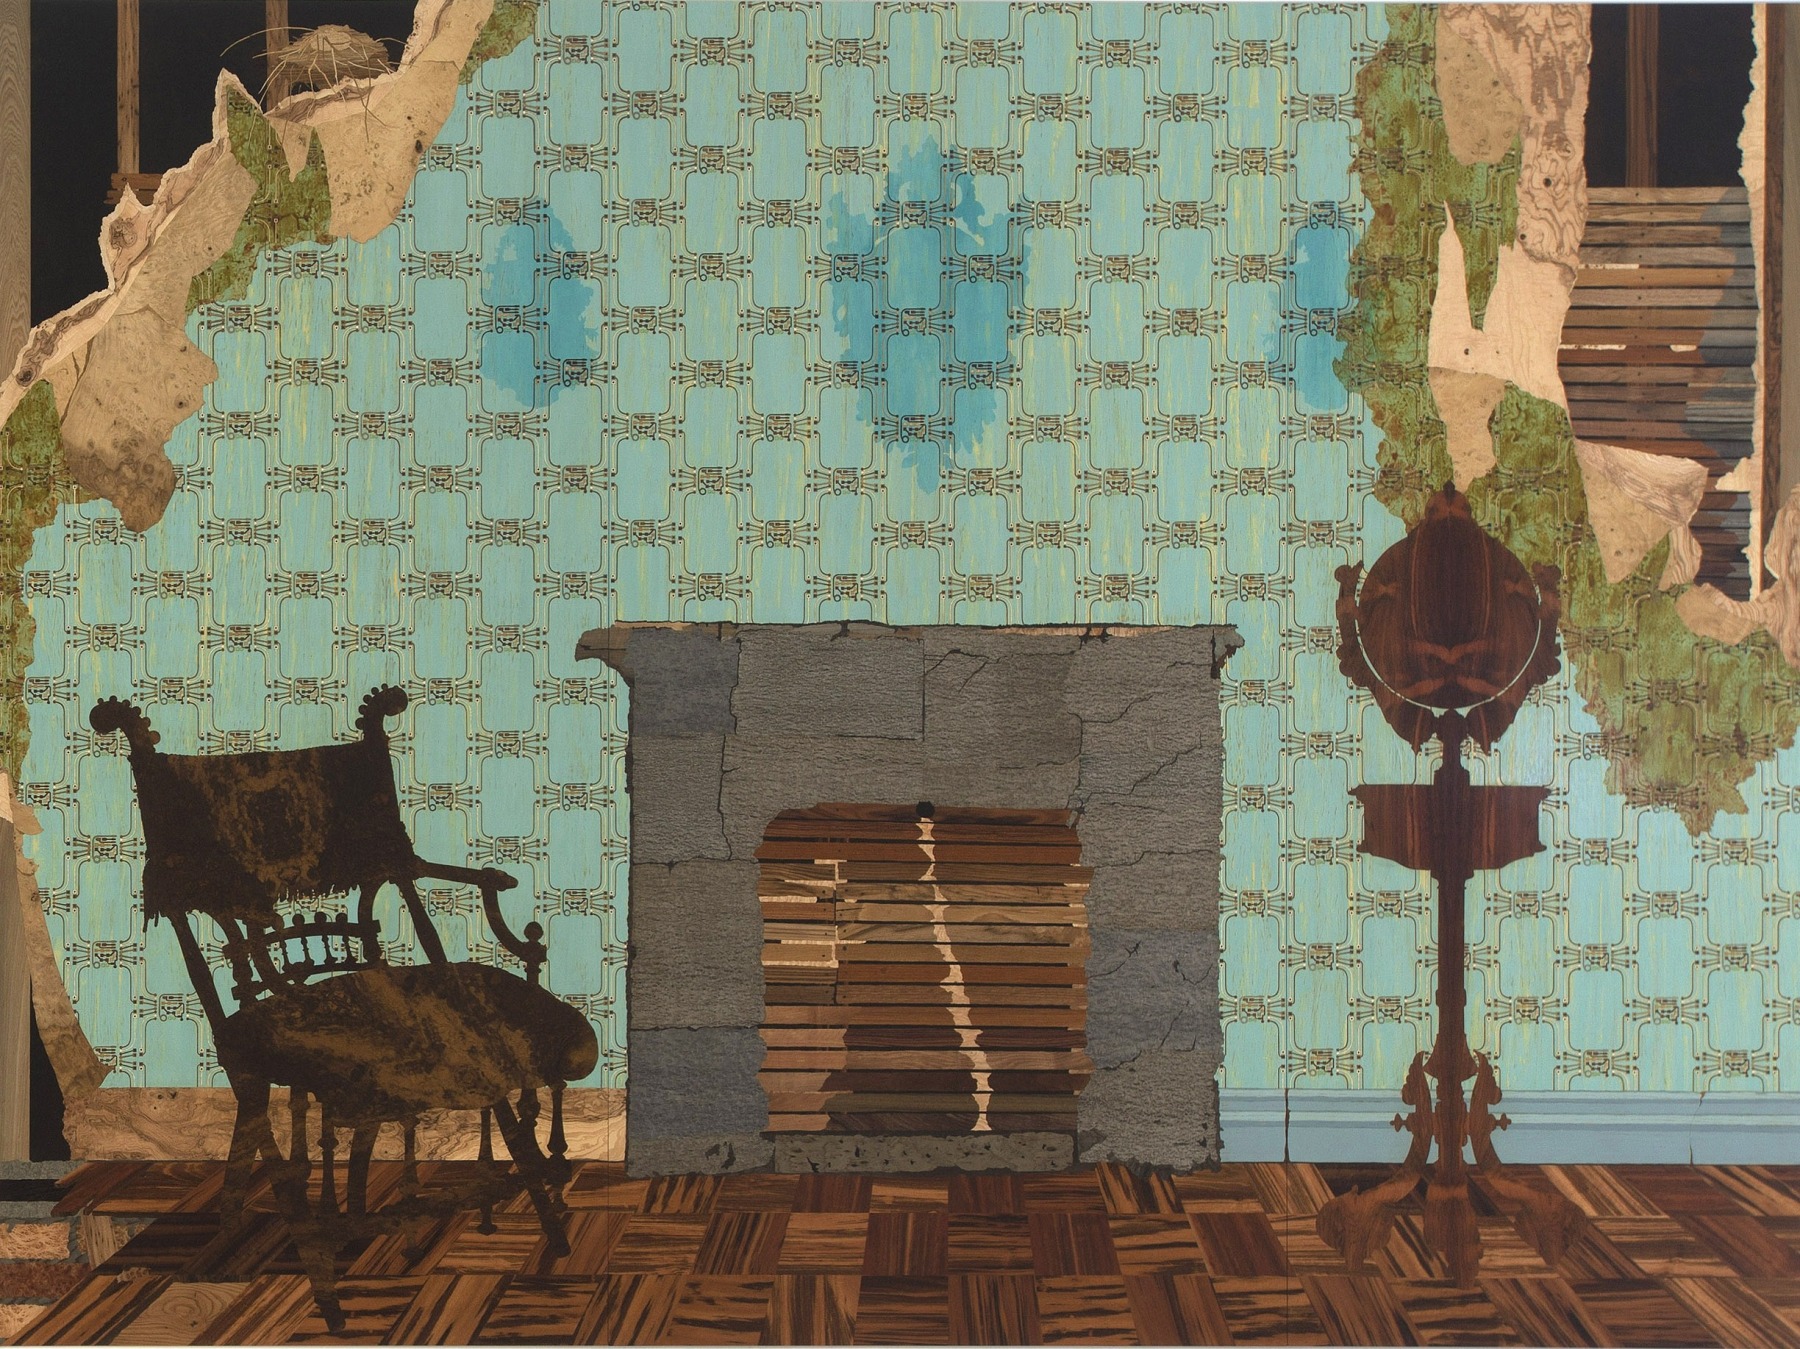 abandoned home interior with peeling wallpaper, water stains, and a boarded up fireplace; a wooden chair and mirror decorate the space